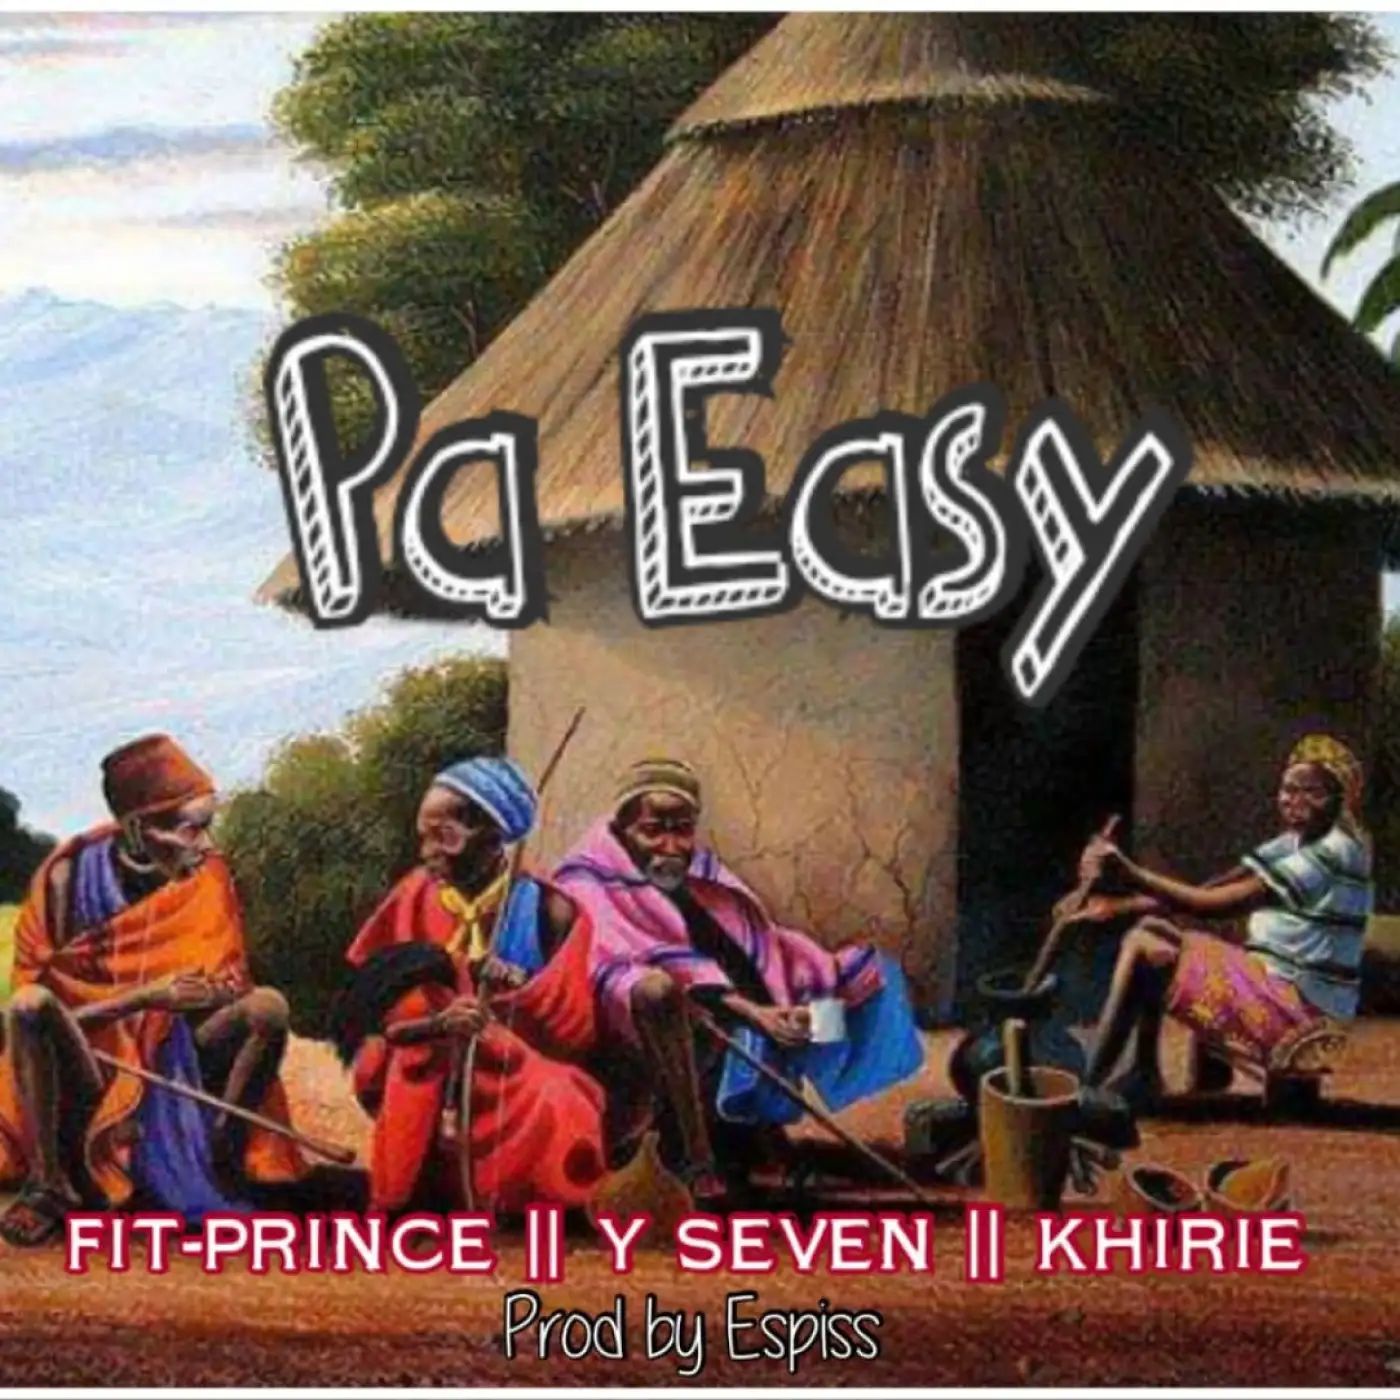 fit-prince-ndili-pa-easy-ft-y-seven-khirie-prod-espiss-mp3-download-mp3 download